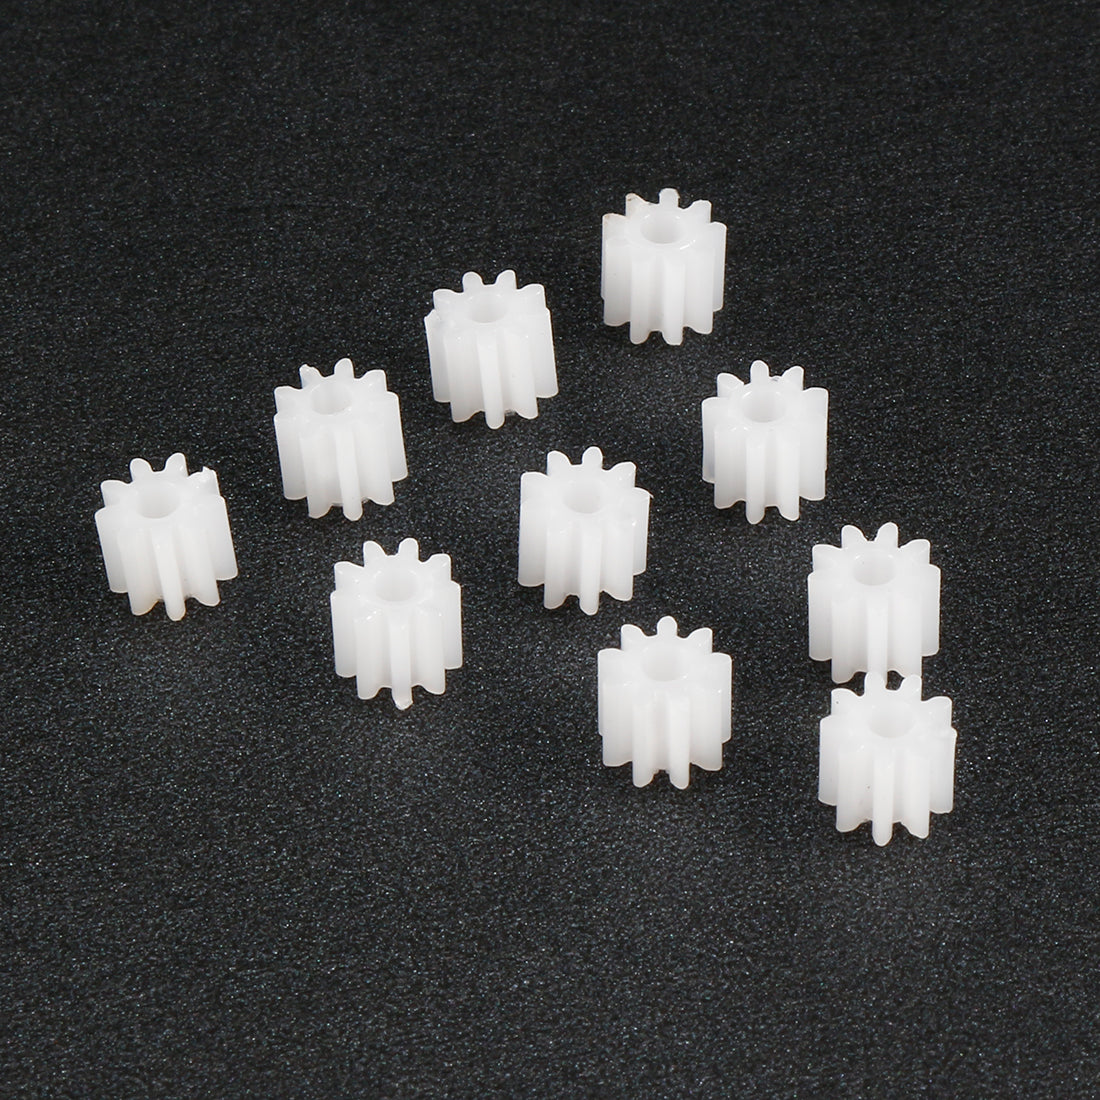 uxcell Uxcell 10Pcs 092A Plastic Gear Accessories with 9 Teeth for DIY Car Robot Motor